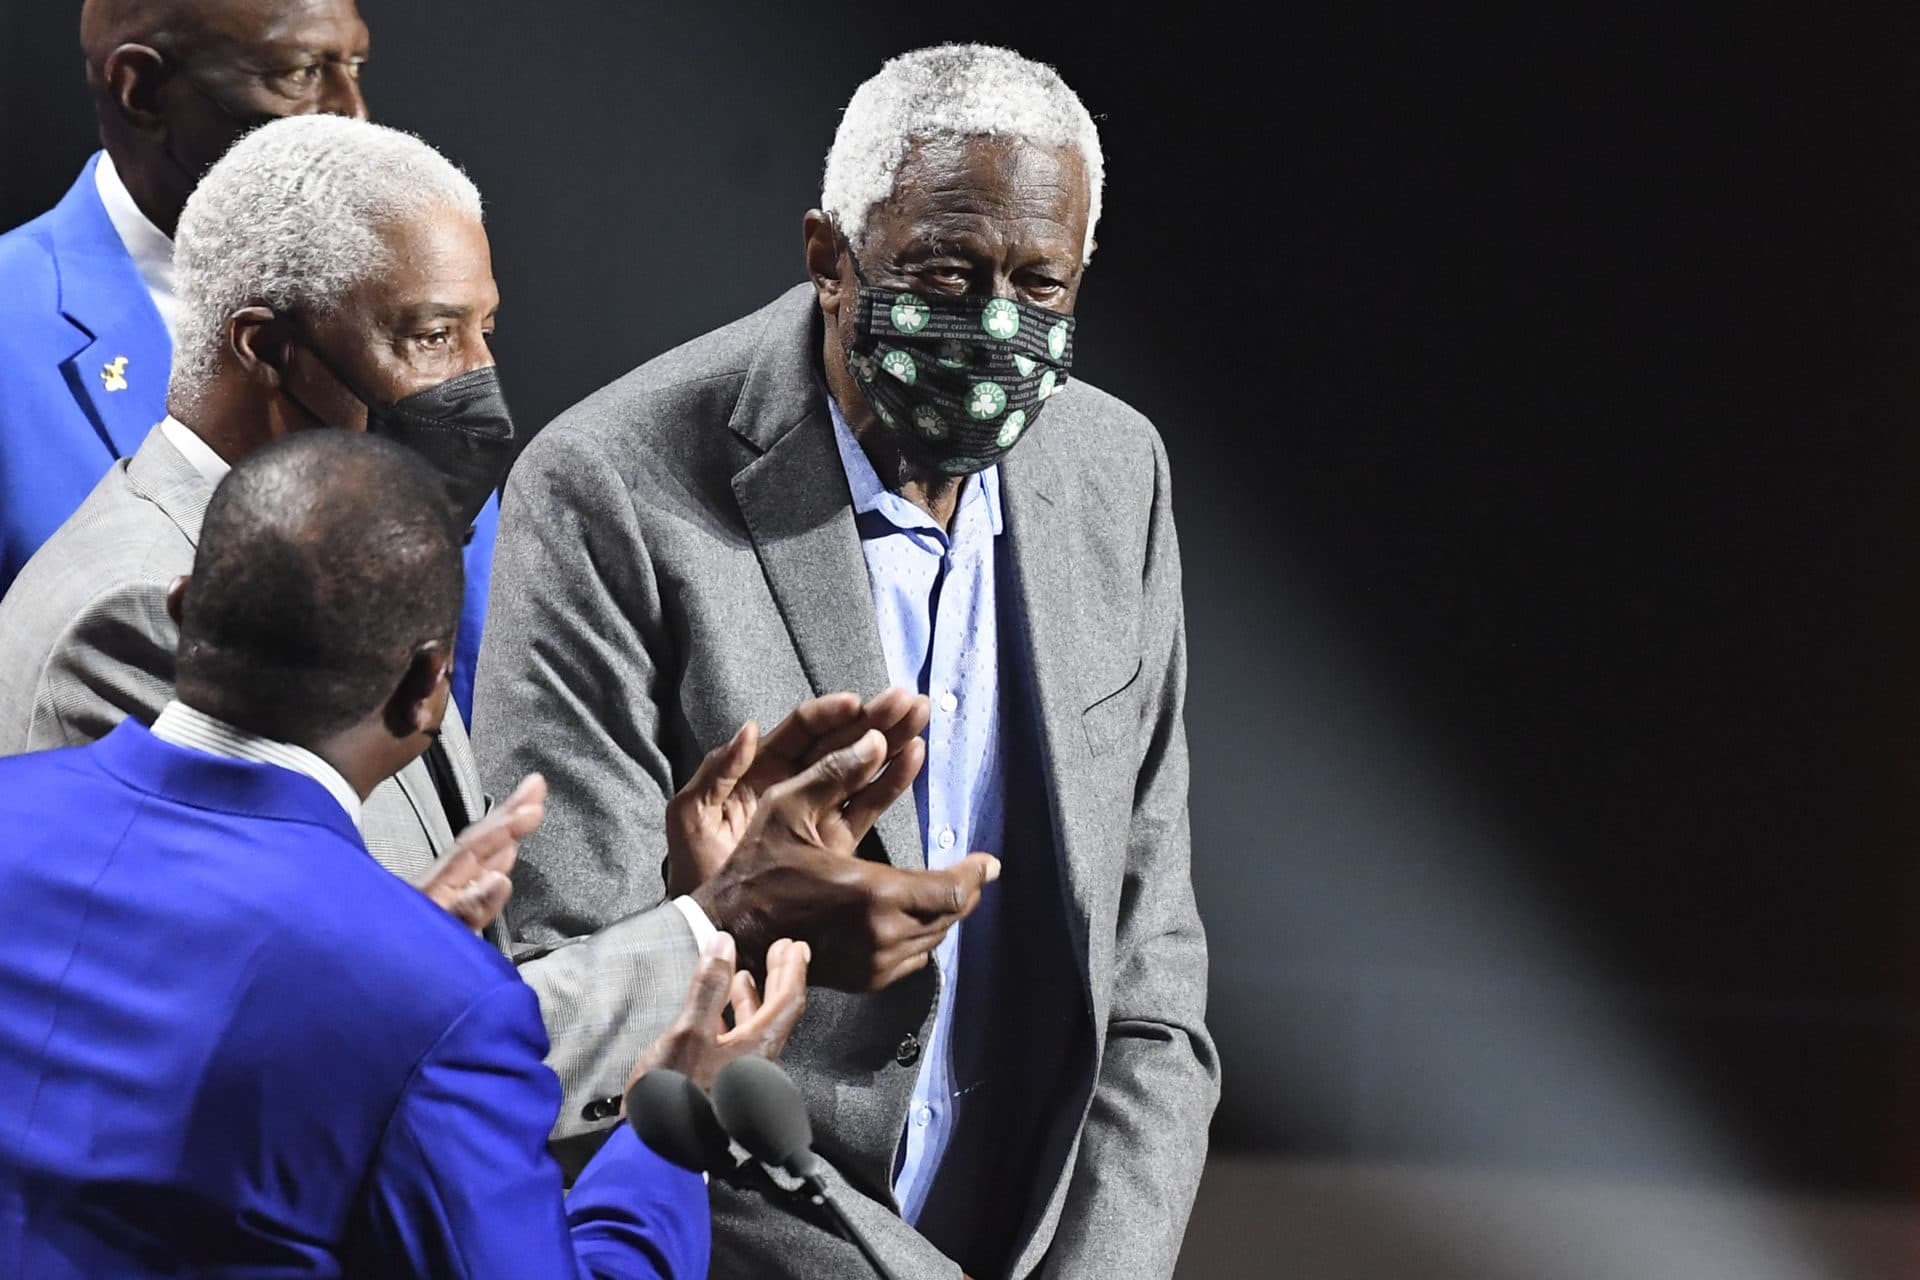 Inductee Bill Russell stands on stage during the 2021 Basketball Hall of Fame Enshrinement ceremony on Sept. 11, 2021, in Springfield, Massachusetts. (Jessica Hill/AP)